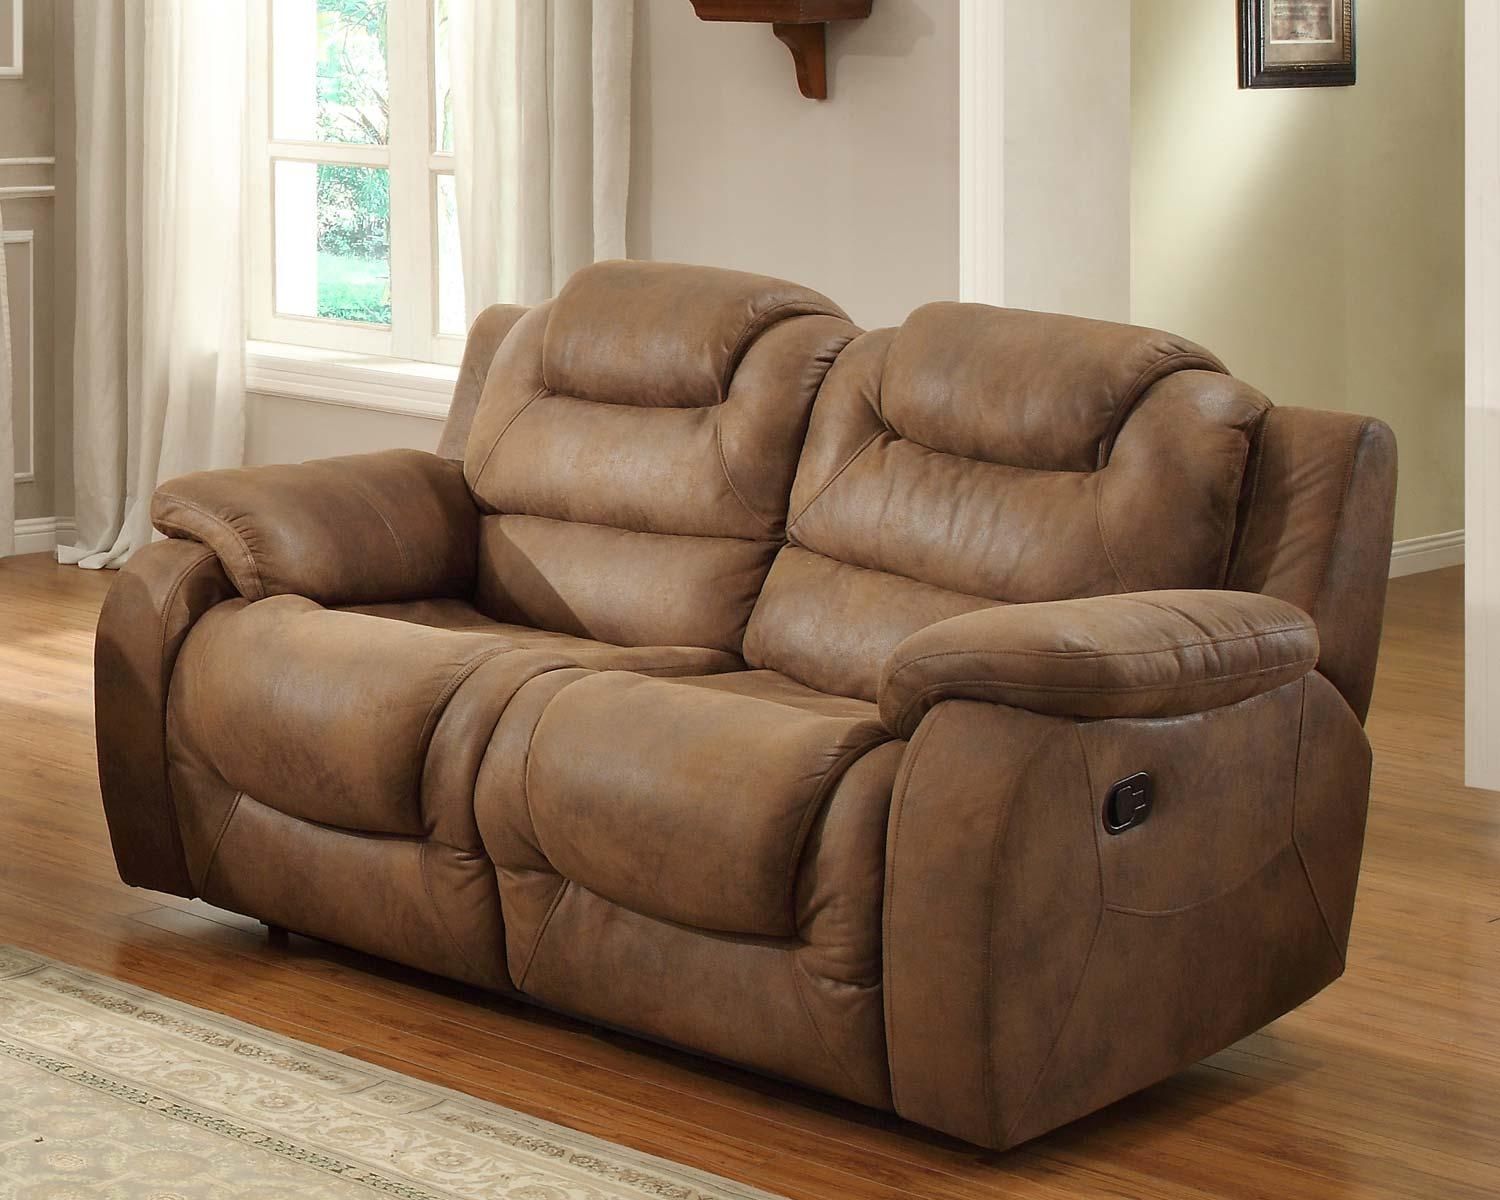 Sofas Center : Reclining Sofa With Console Double Power Recliner Pertaining To Sofas With Consoles (View 10 of 20)